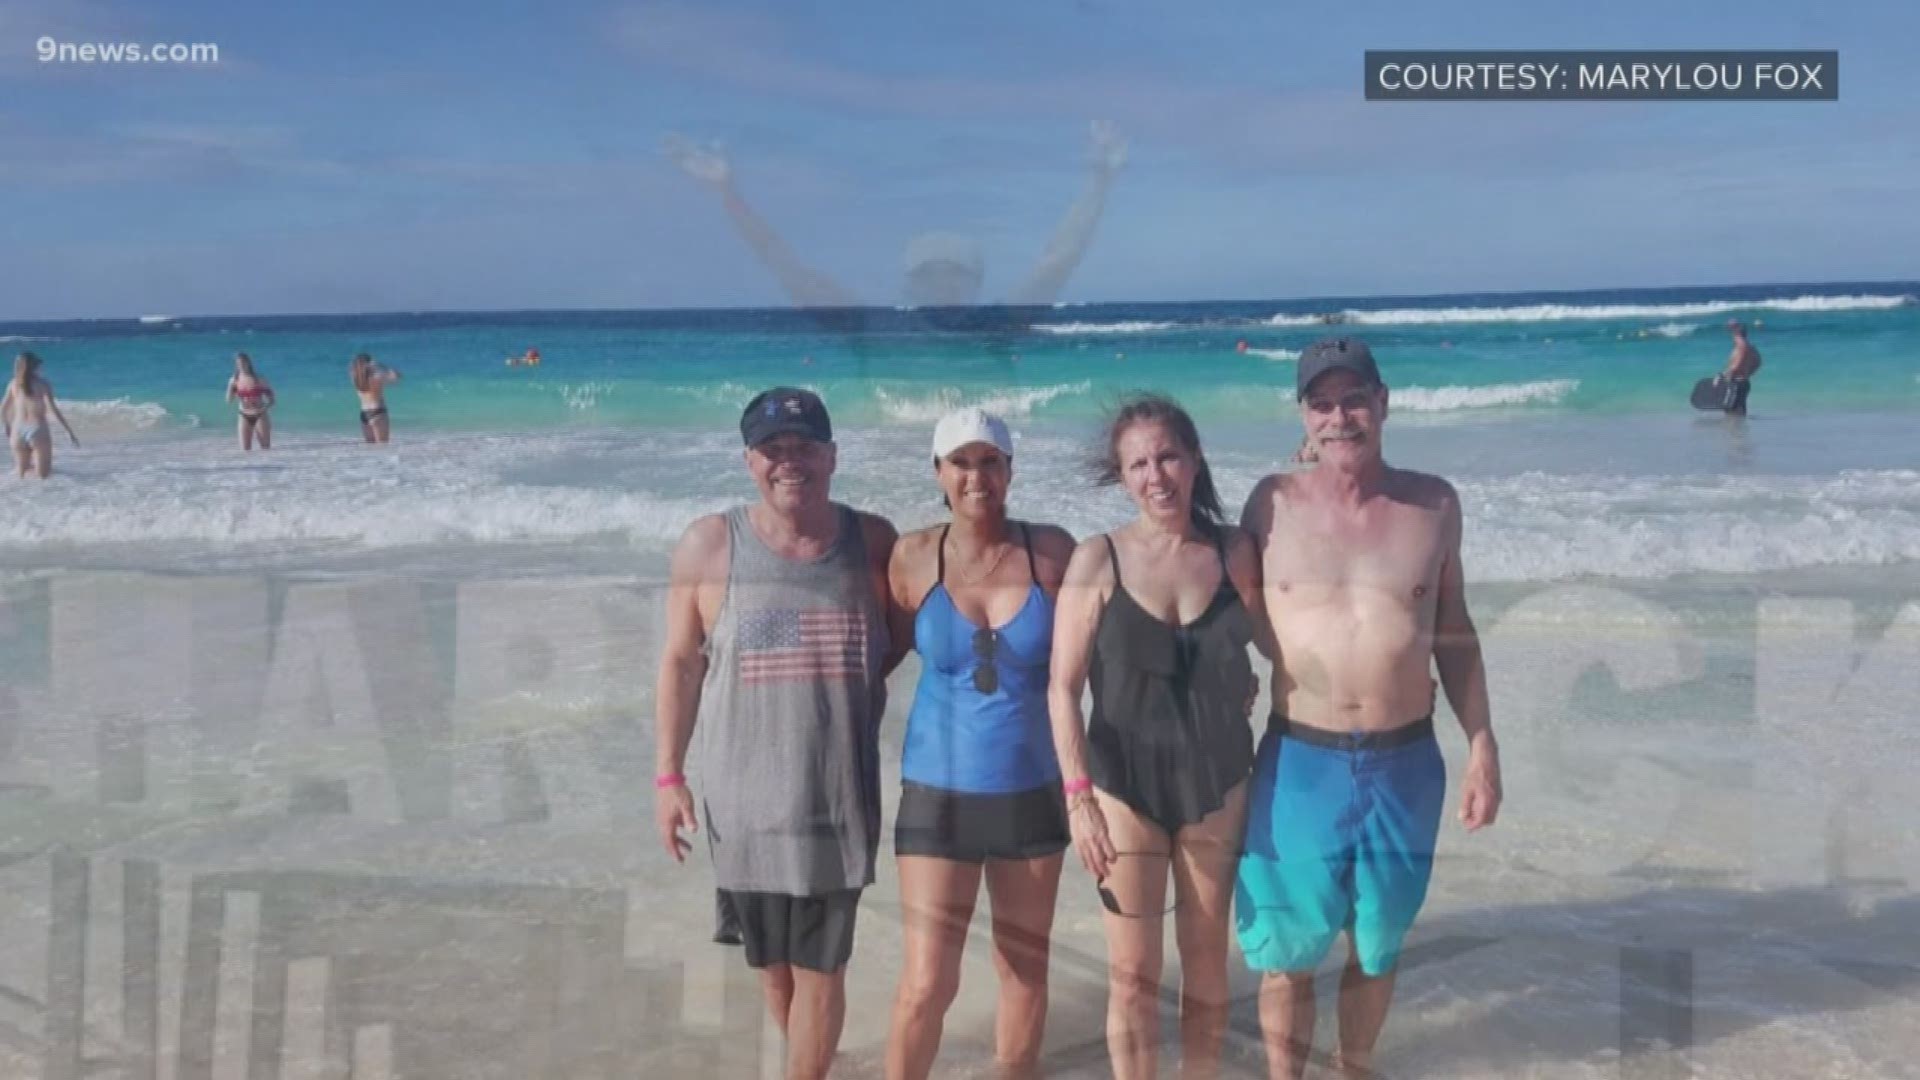 At least eight American tourists have died while vacationing at resorts in the Dominican Republic in the last year. Many others have come forward about becoming suddenly sick, including Marylou Fox of Elizabeth who stayed at the Hard Rock Hotel Punta Cana in early April.